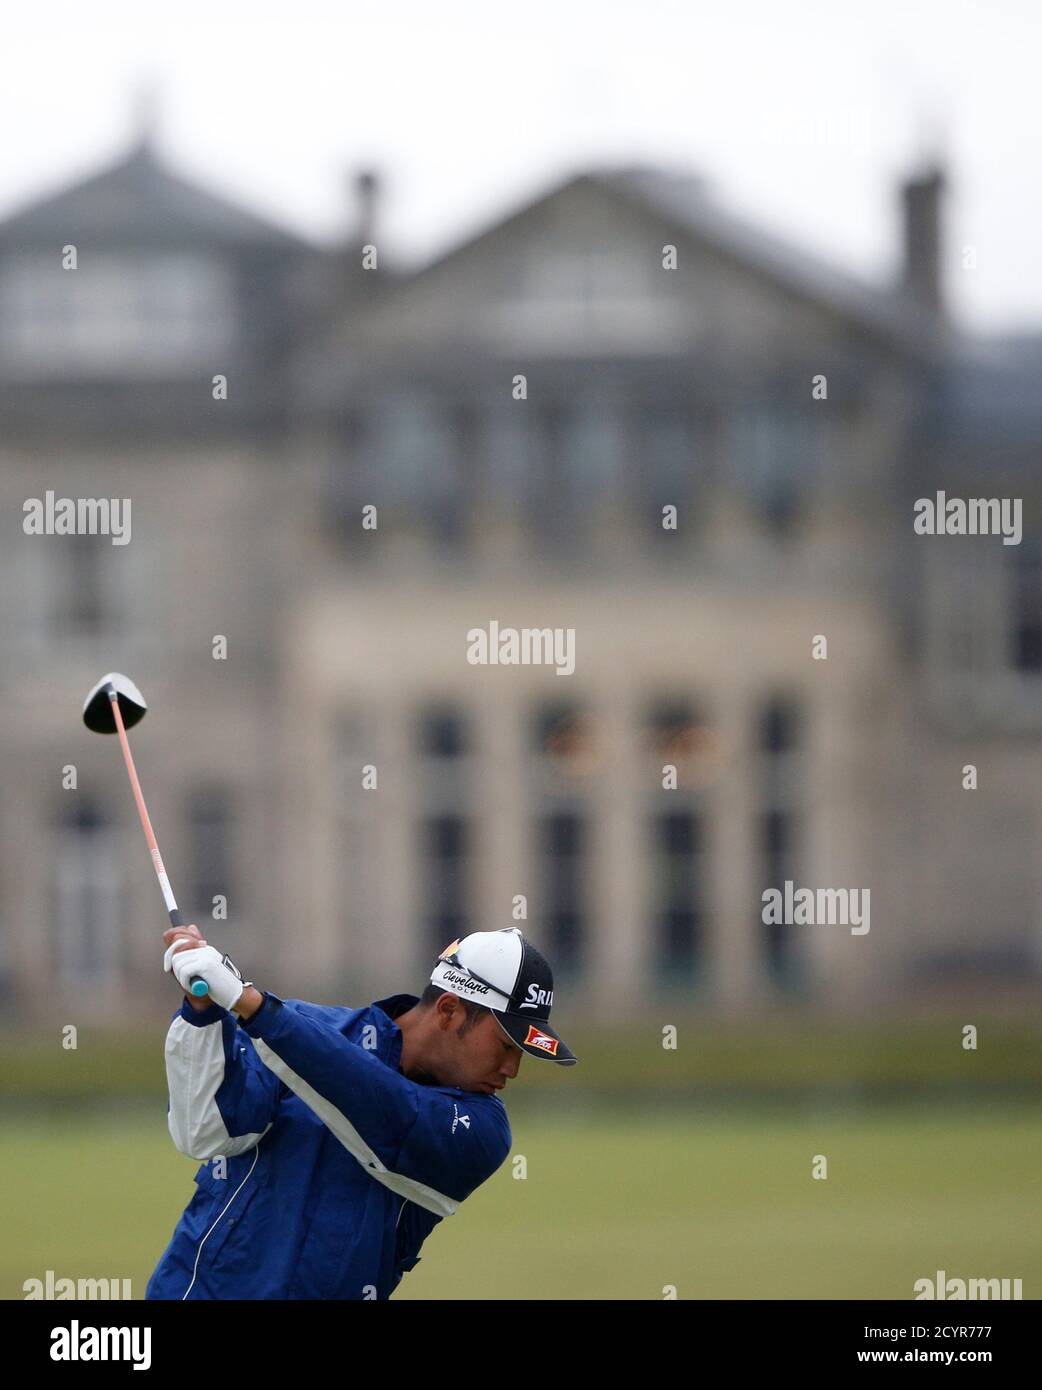 Hideki Matsuyama of Japan hits off the 18th tee during a practice round ahead of the British Open golf championship on the Old Course in St. Andrews, Scotland, July 15, 2015.  REUTERS/Russell Cheyne Stock Photo